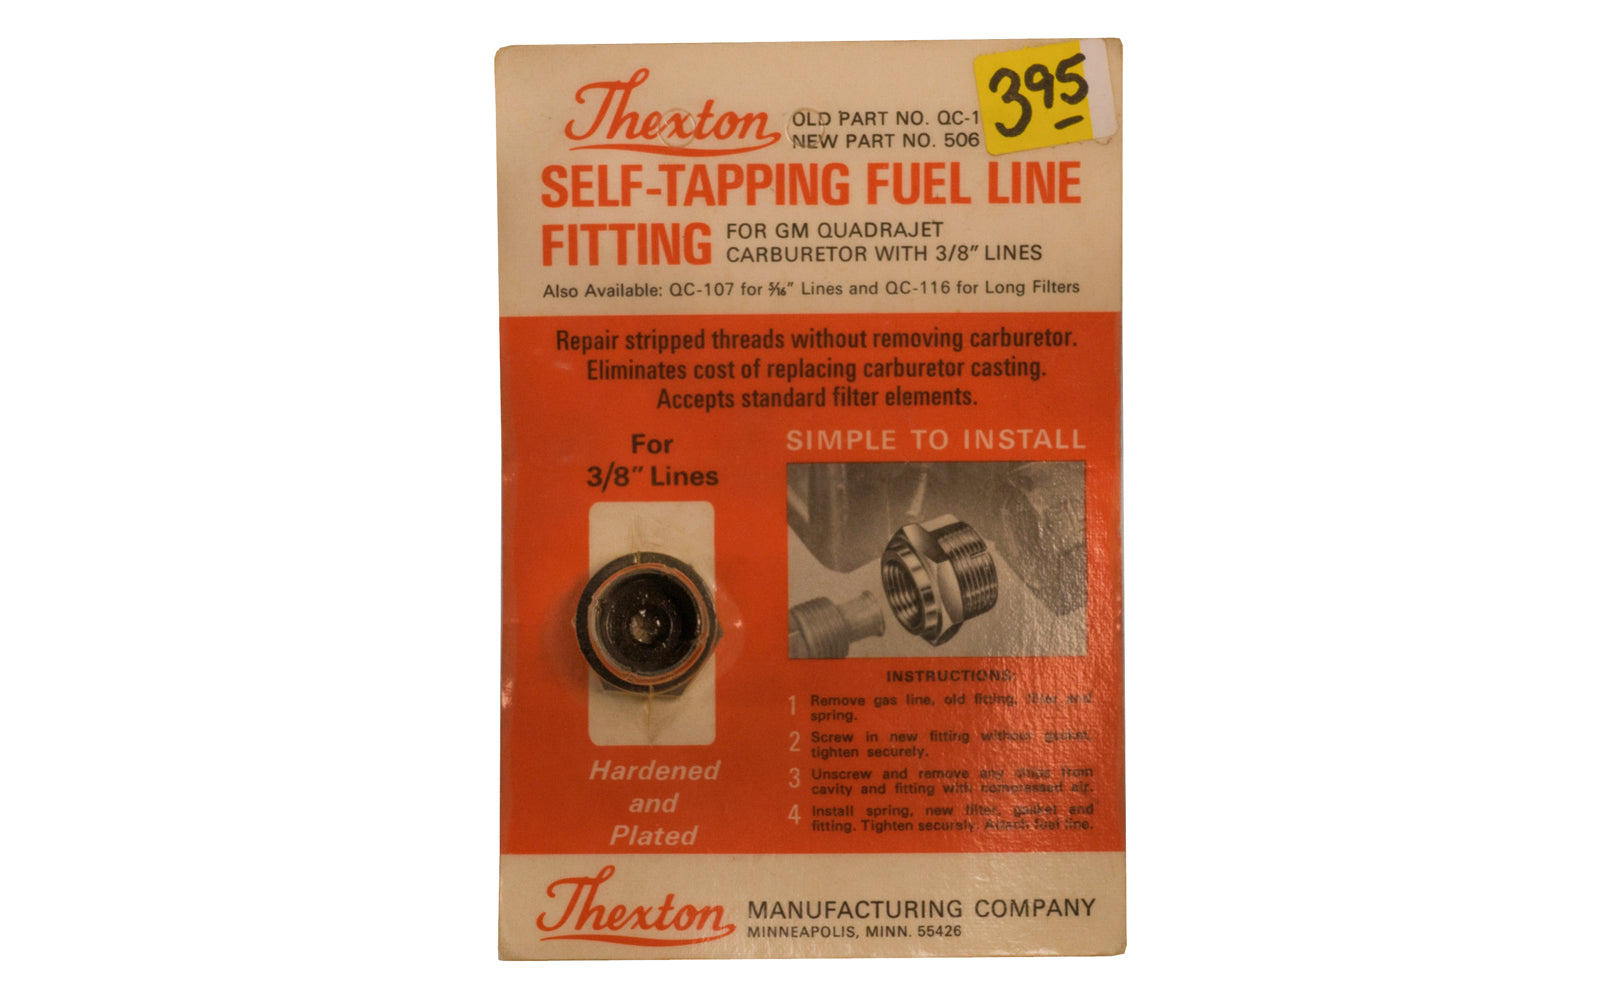 Thexton Self-Tapping Fuel Line Fitting for GM Quadrajet Carburetor with 3/8